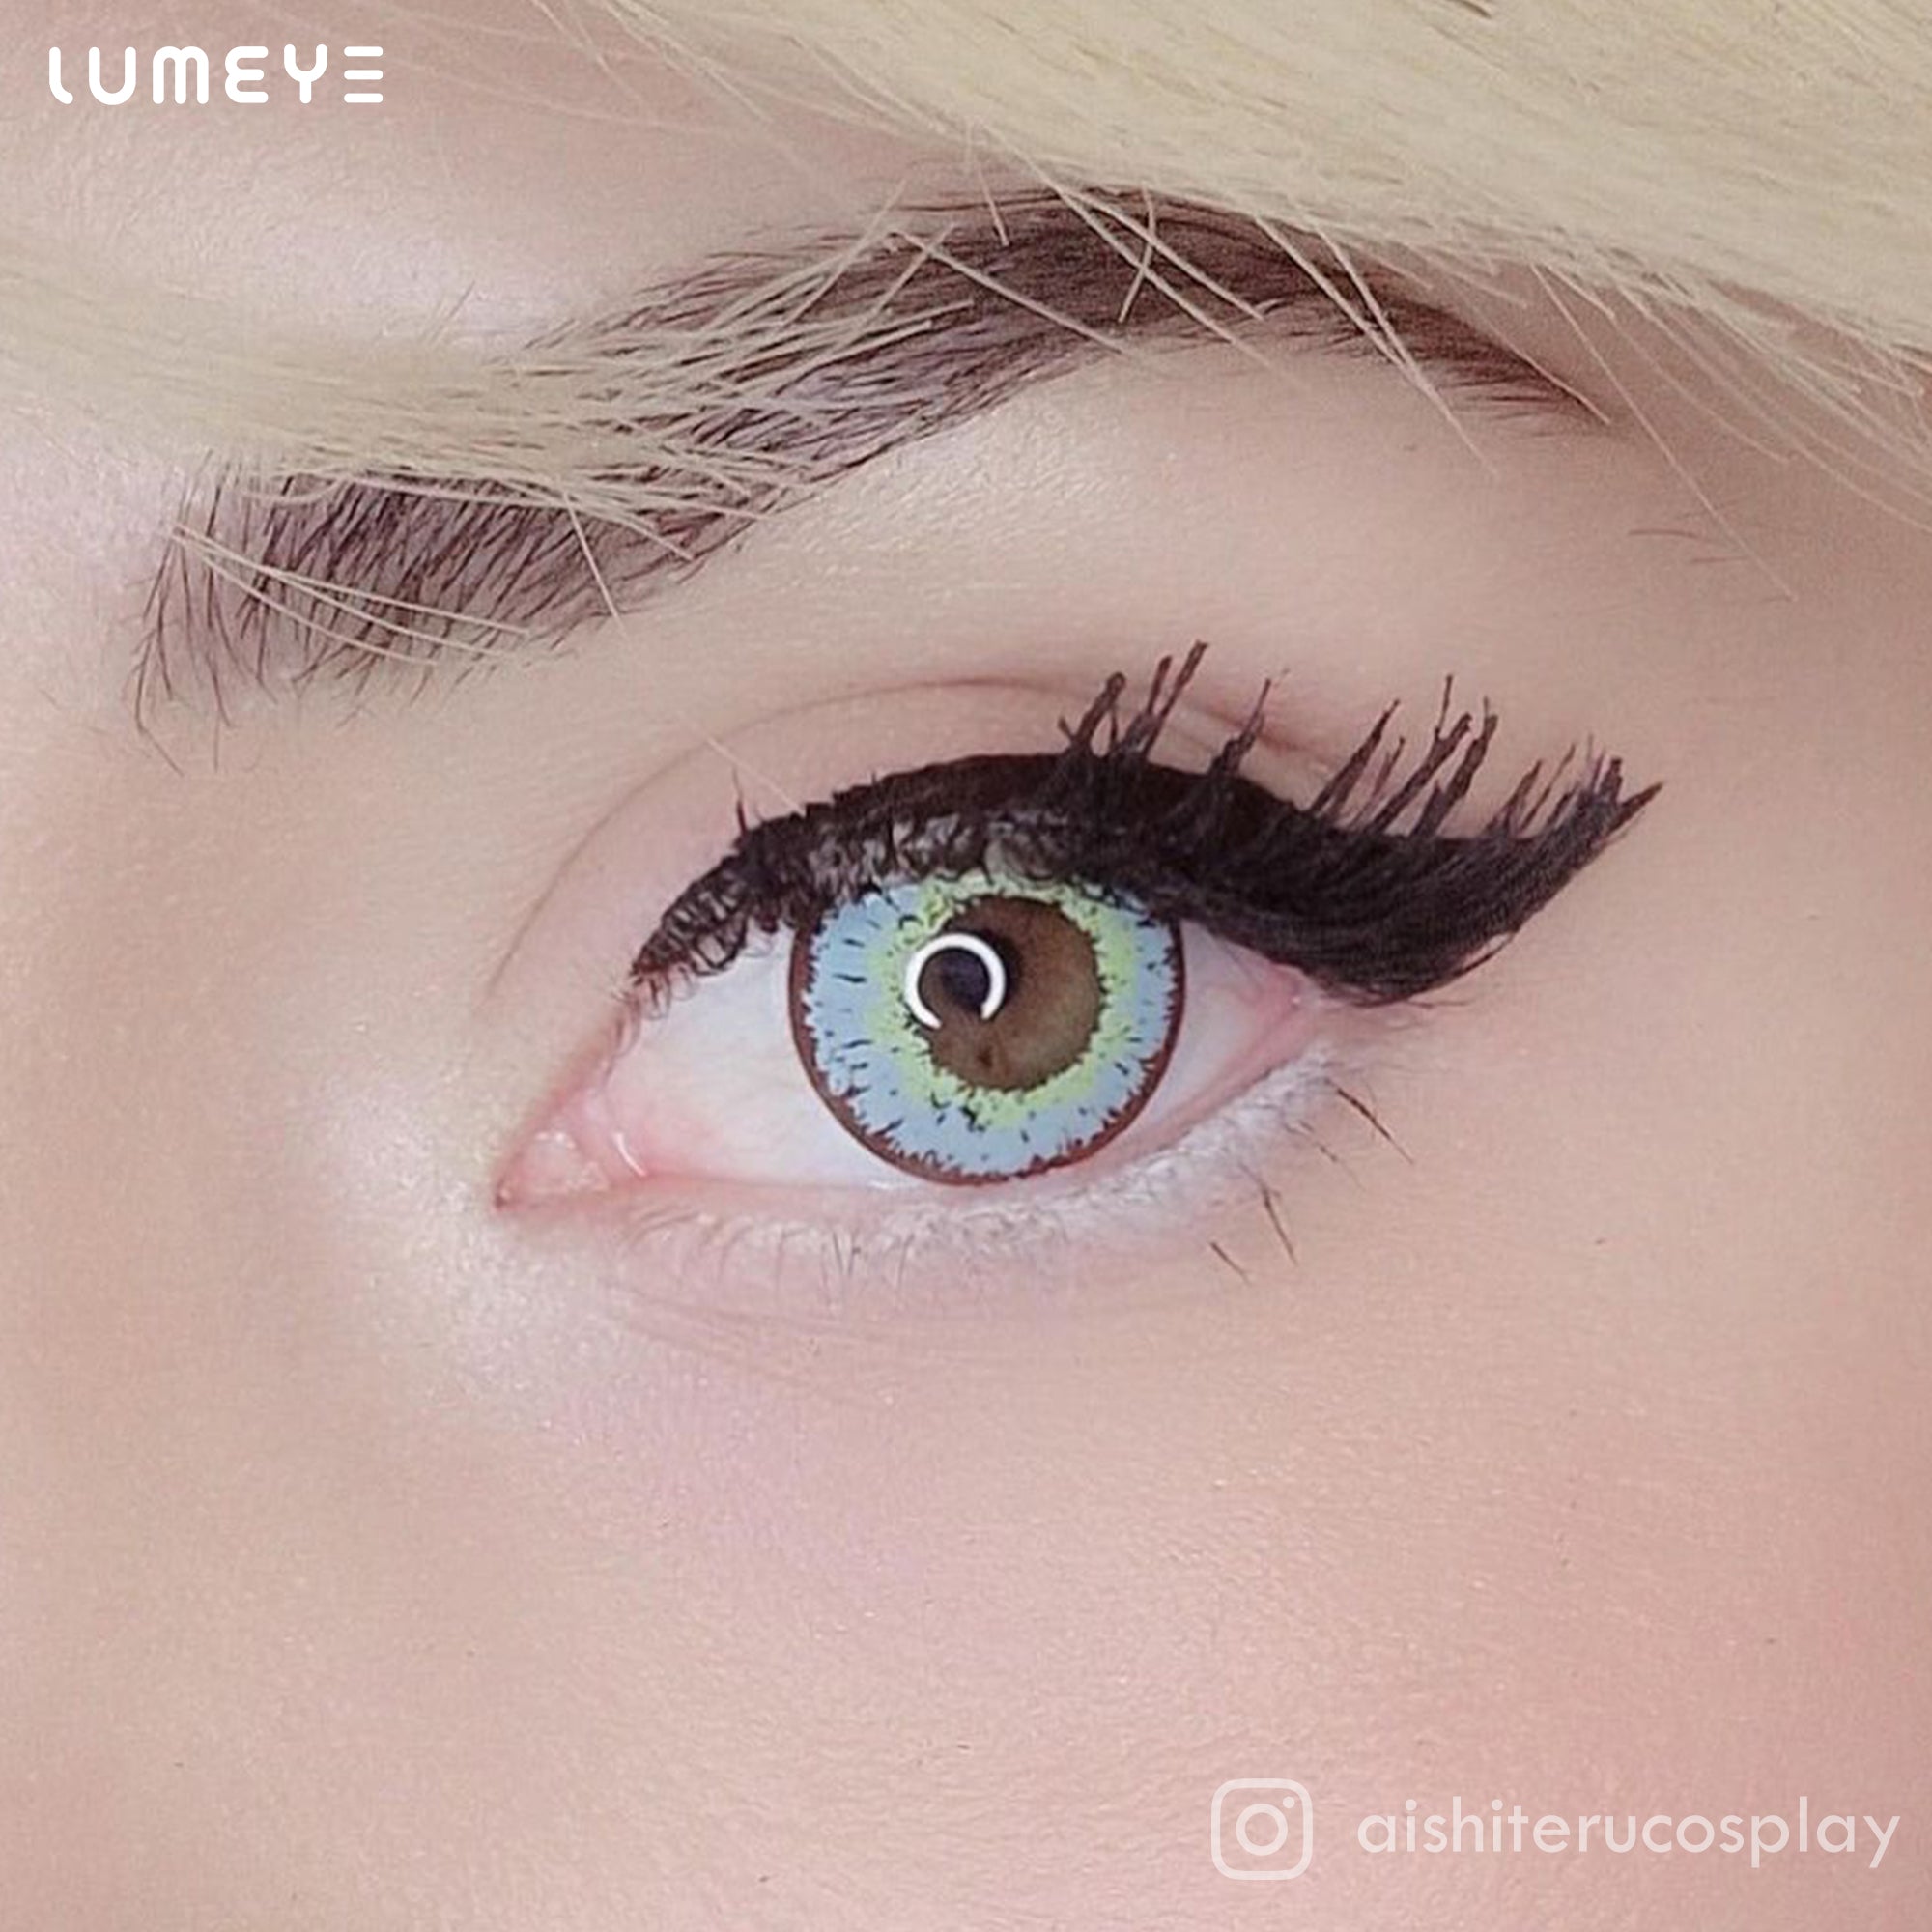 Best COLORED CONTACTS - LUMEYE Candy Mint Blue Colored Contact Lenses - LUMEYE